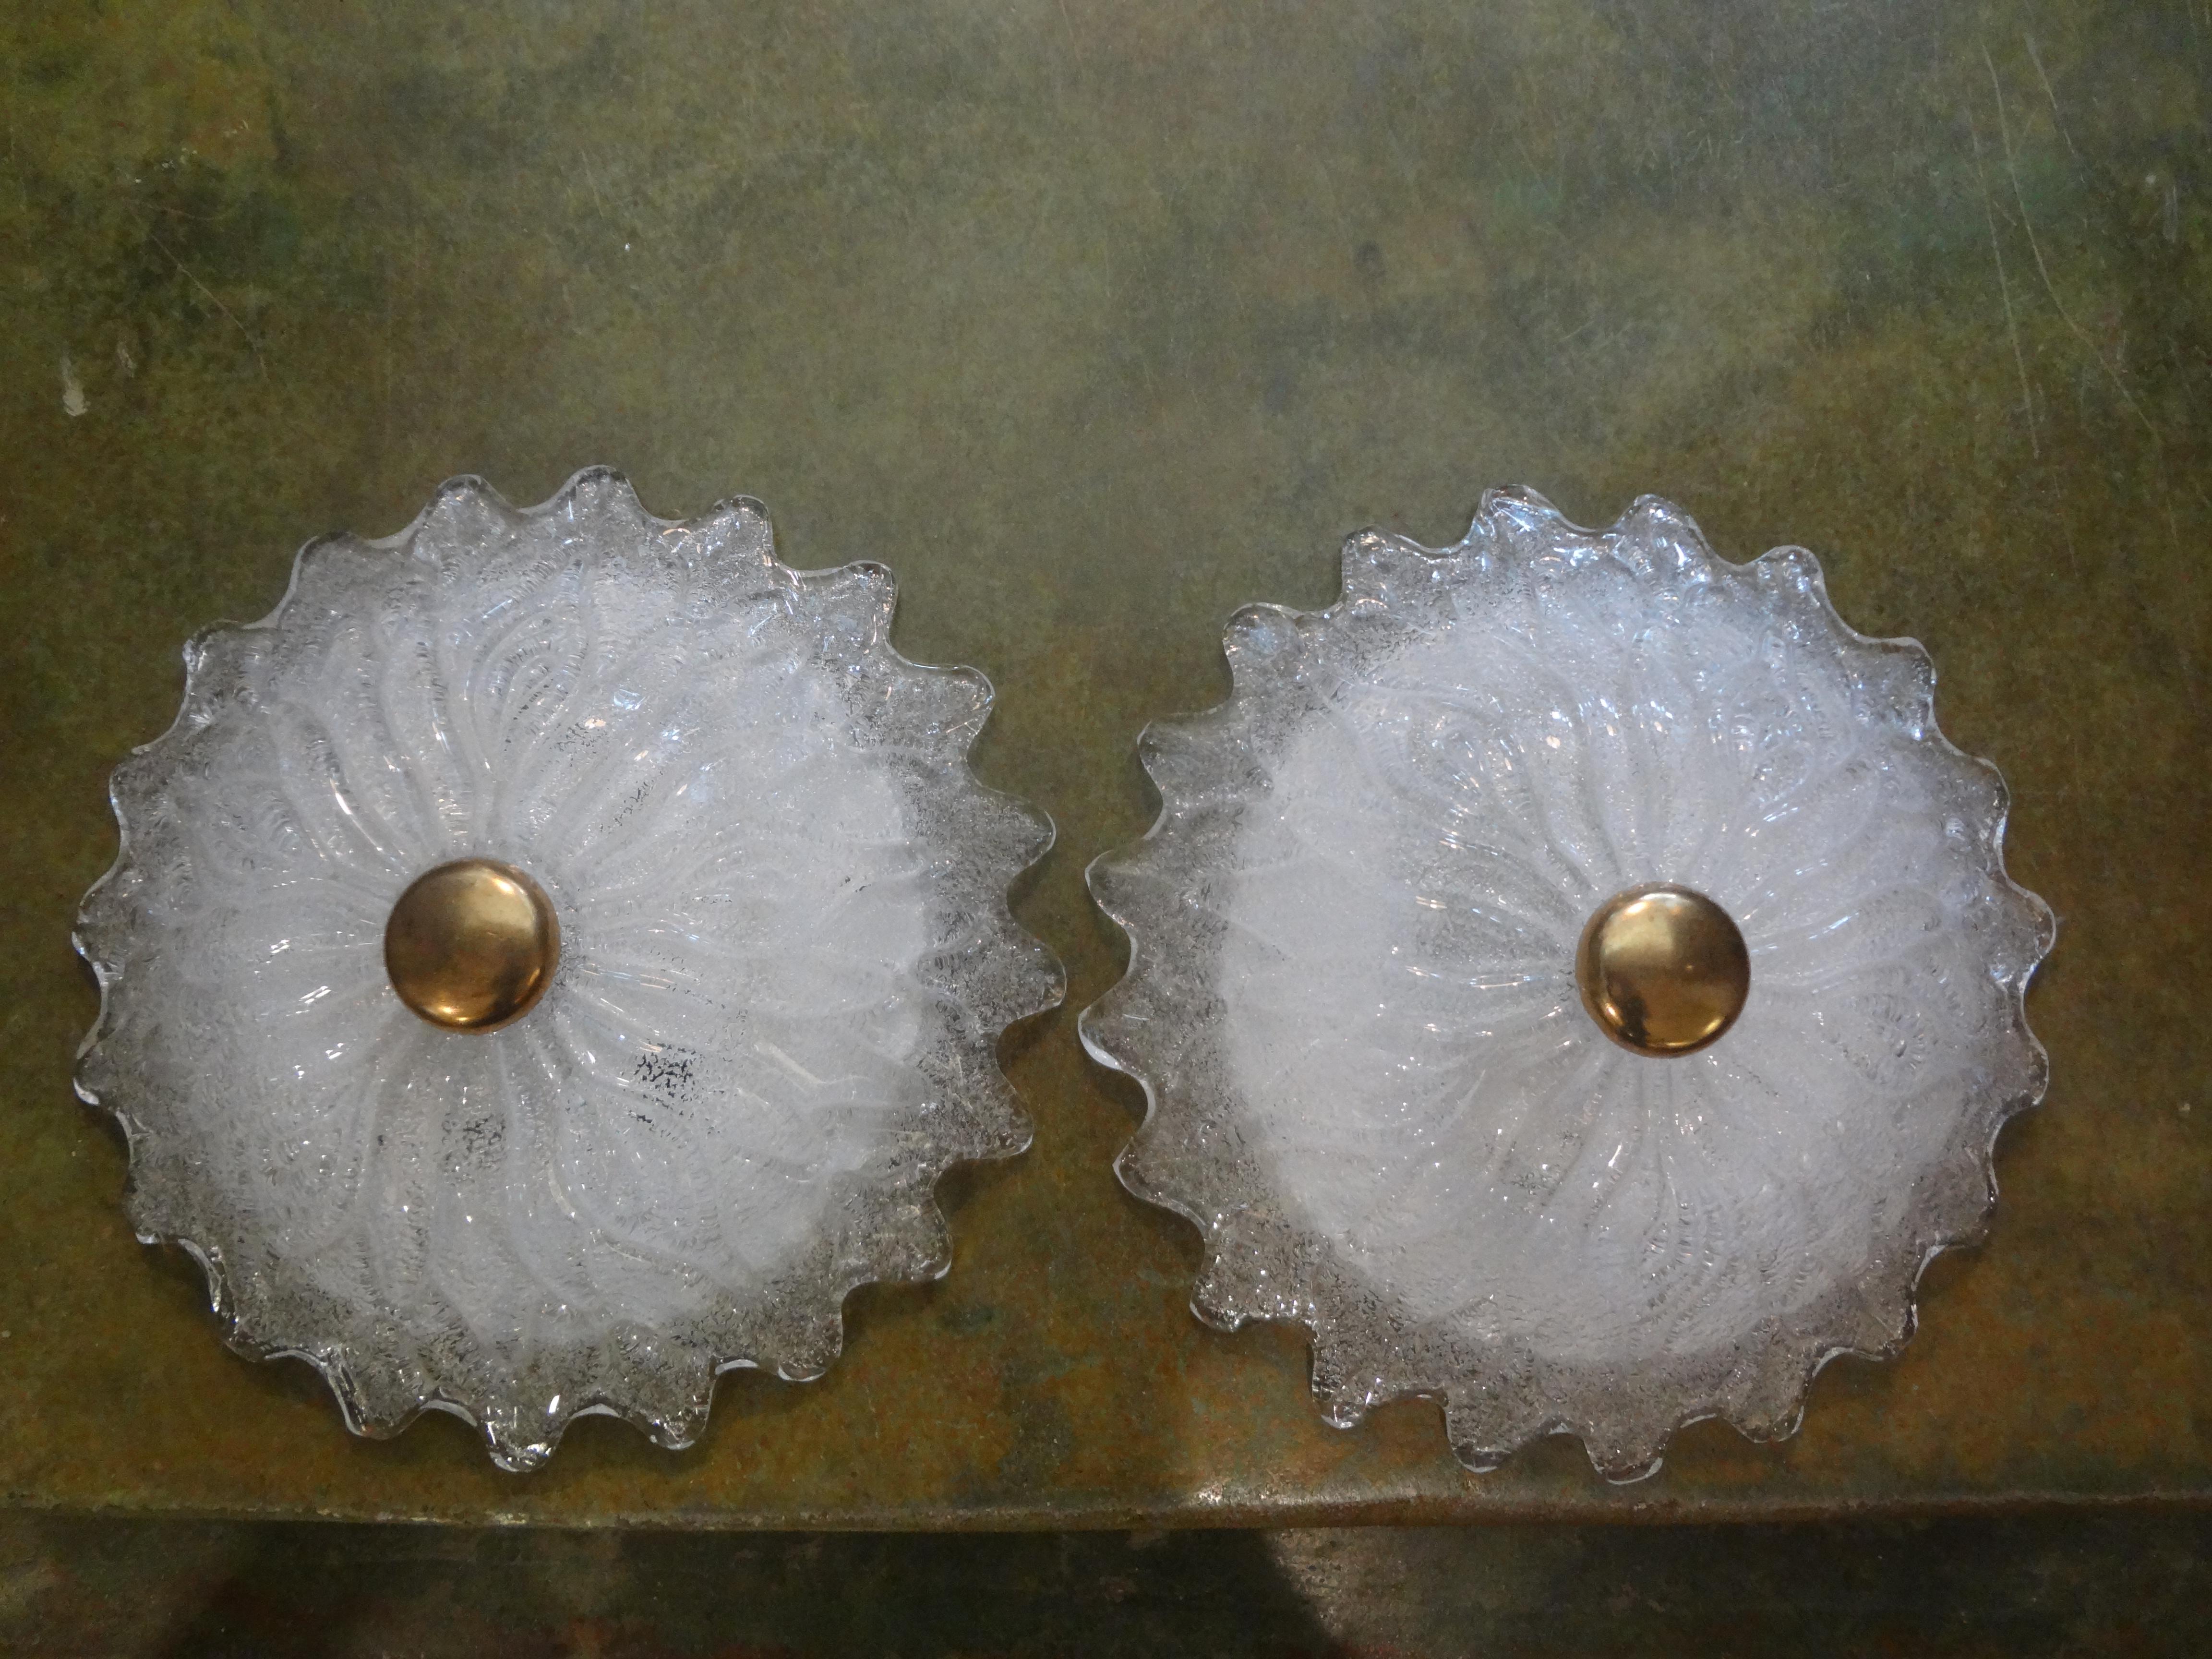 Unusual pair of Murano glass and brass flower sconces by Barovier. These stunning Italian glass sconces have been newly wired for the U.S. Market. This vintage pair of white Murano glass sconces date to the 1980s. These Mid-Century Modern Murano